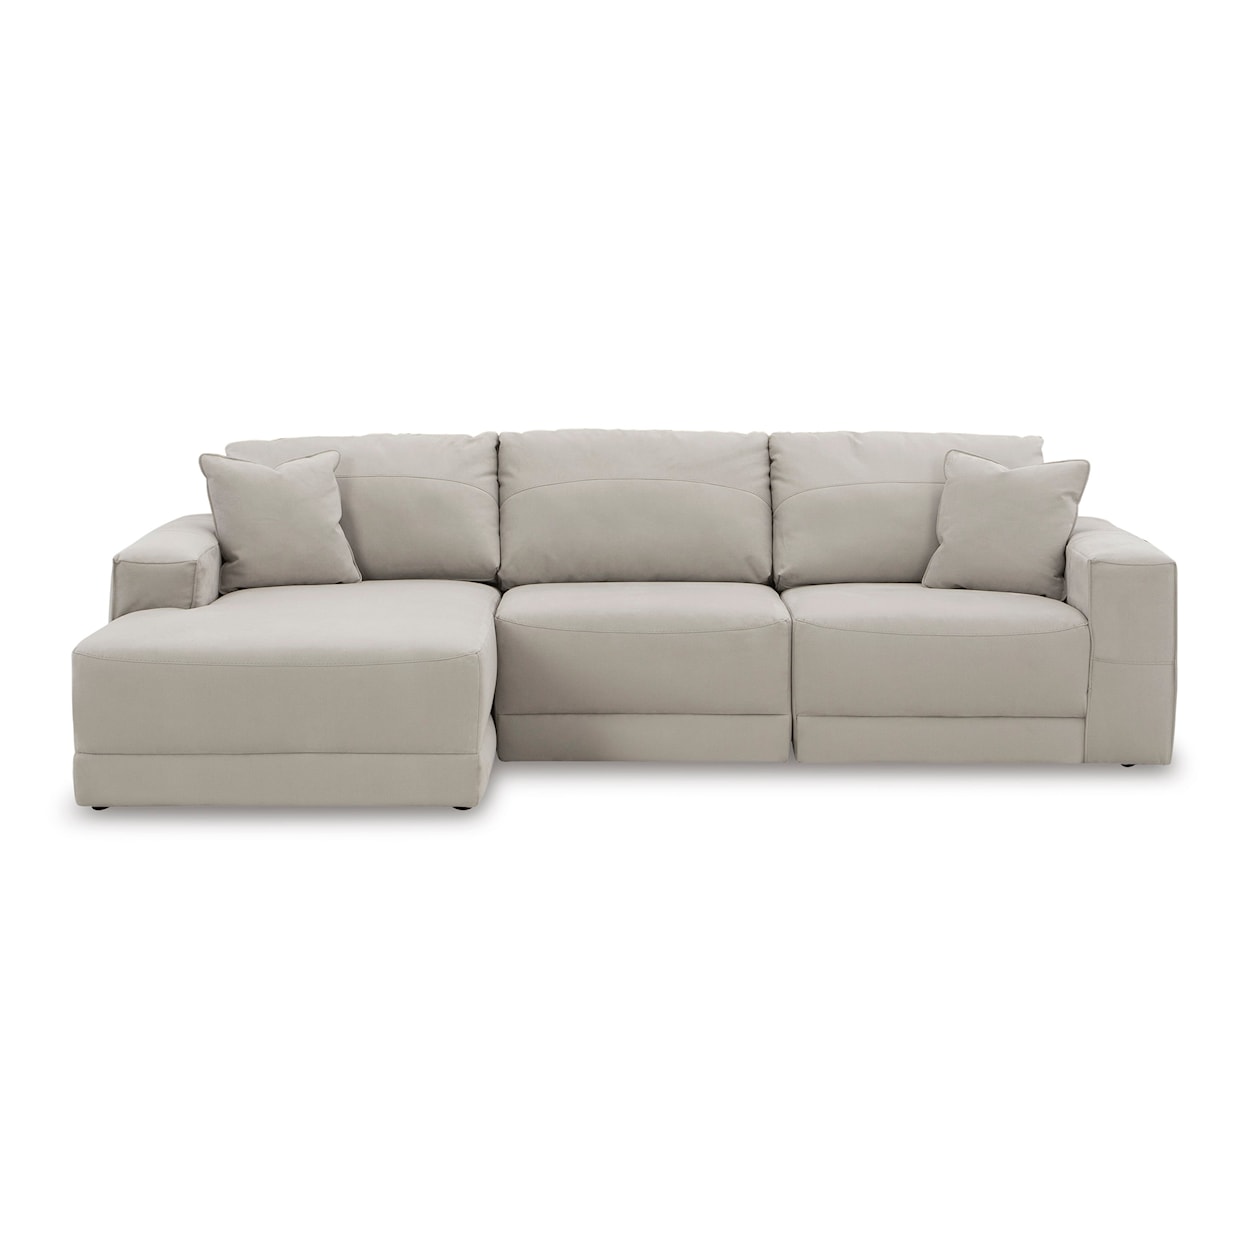 JB King Next-Gen Gaucho 3-Piece Sectional Sofa with Chaise